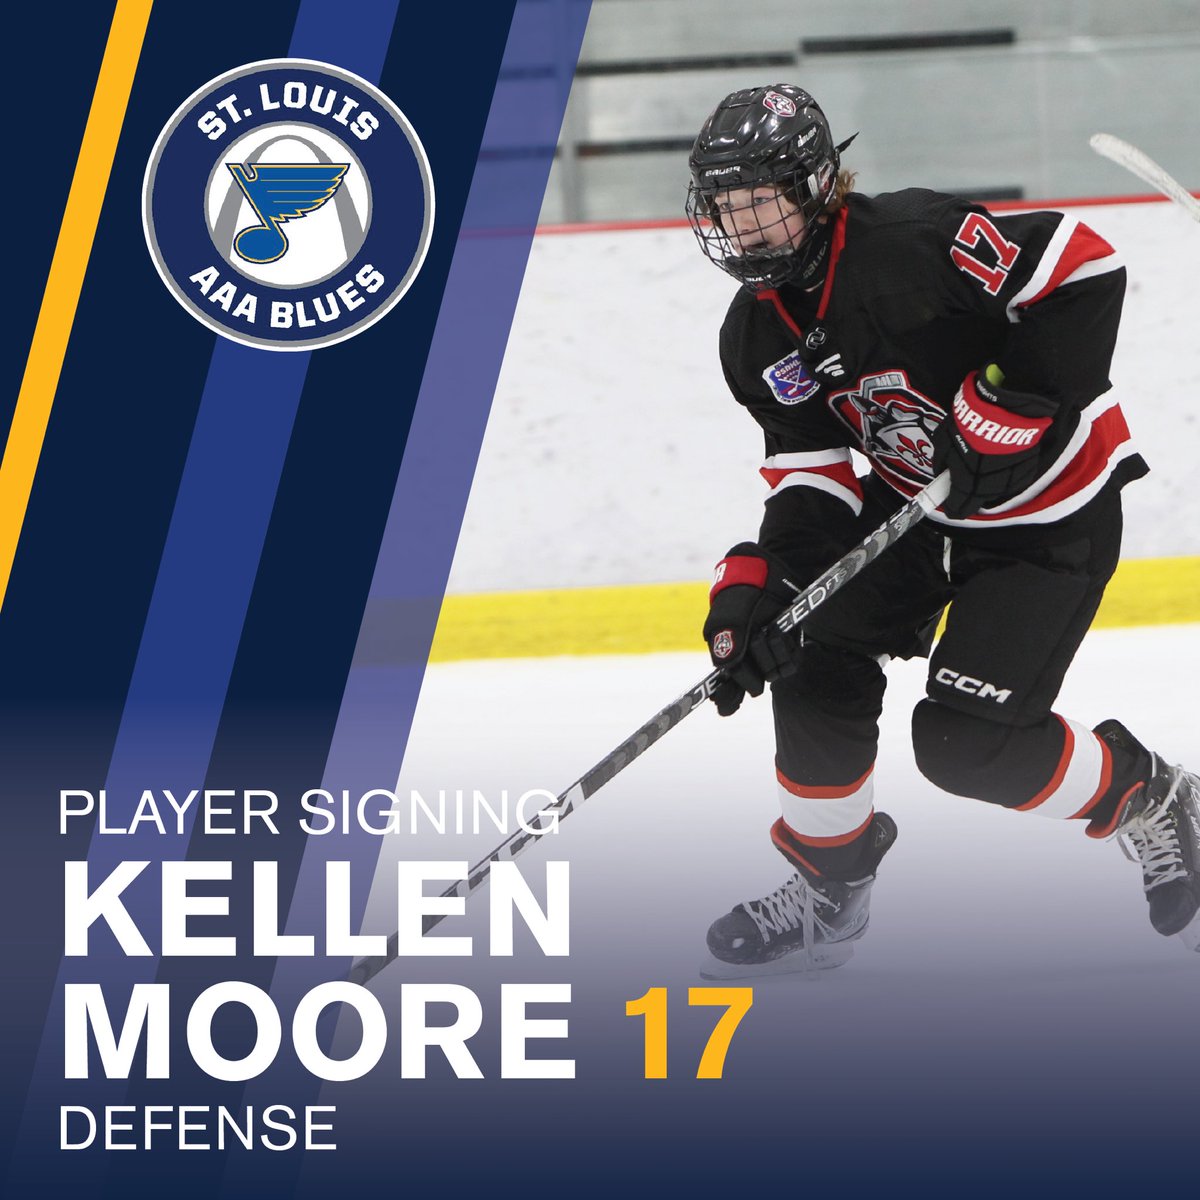 2023-24 Player Signing Announcement: We are excited to welcome Kellen Moore to the team.  Kellen joins us for his first season with the @AAABlues #AAAHockey #BantamMinor